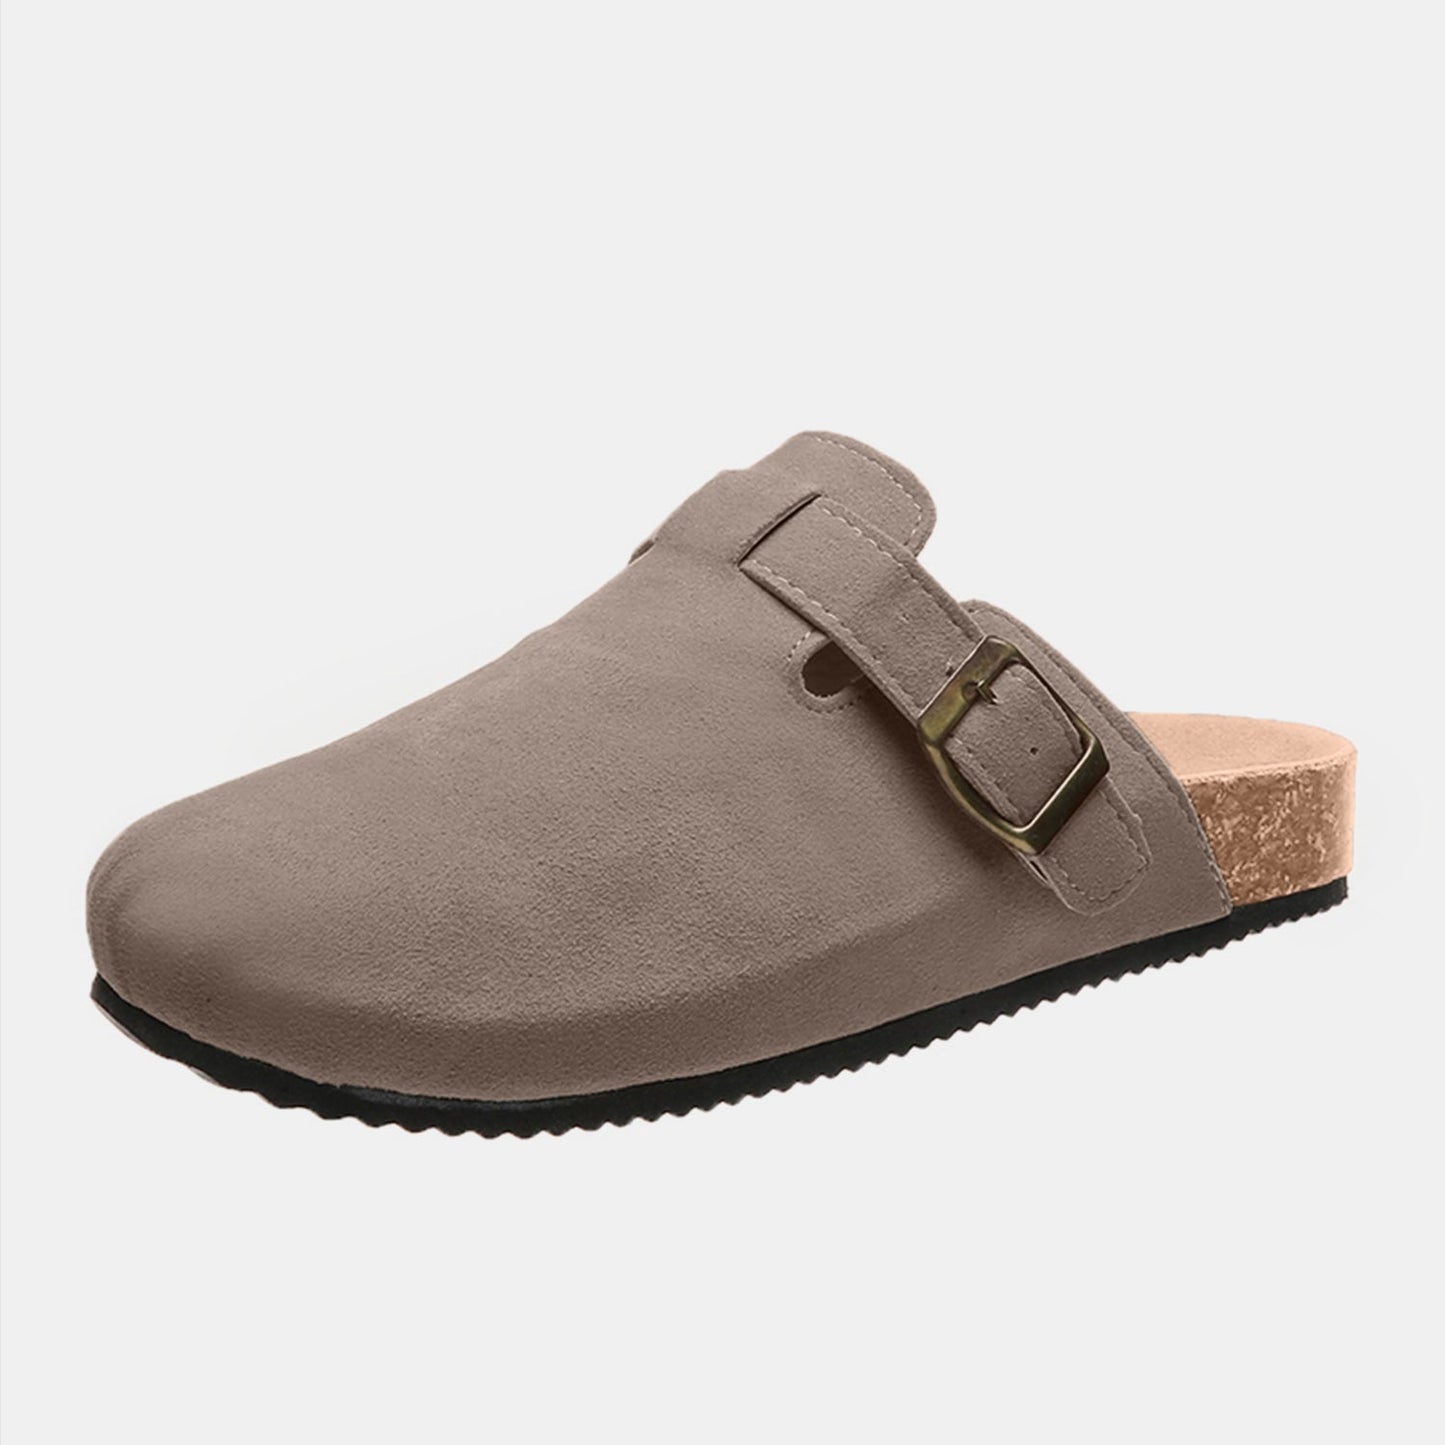 Suede Closed Toe Buckle Slide Charcoal / 9.5